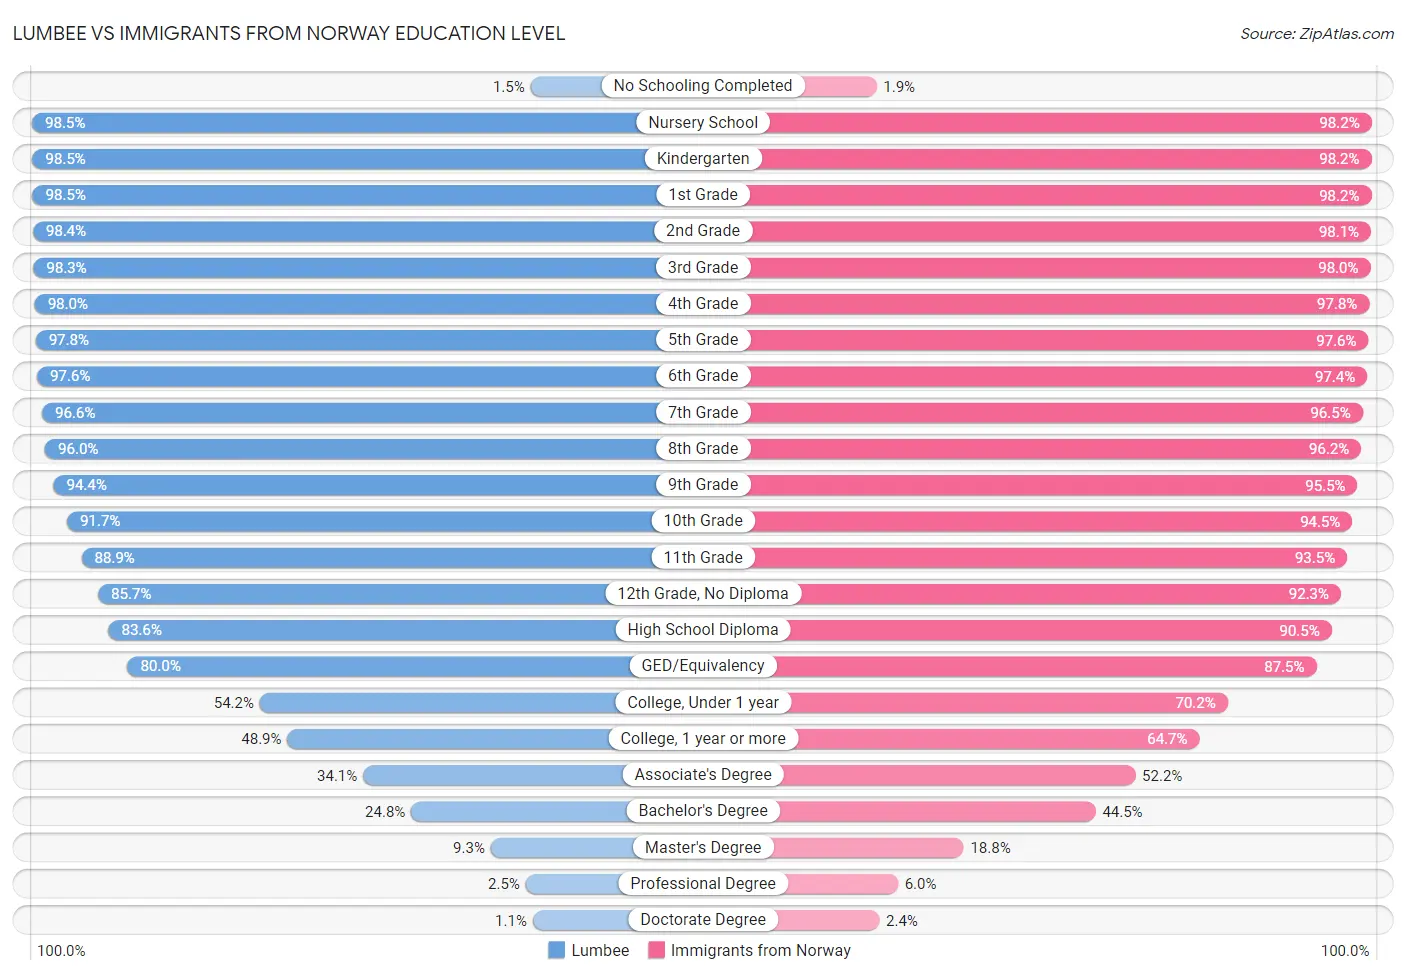 Lumbee vs Immigrants from Norway Education Level